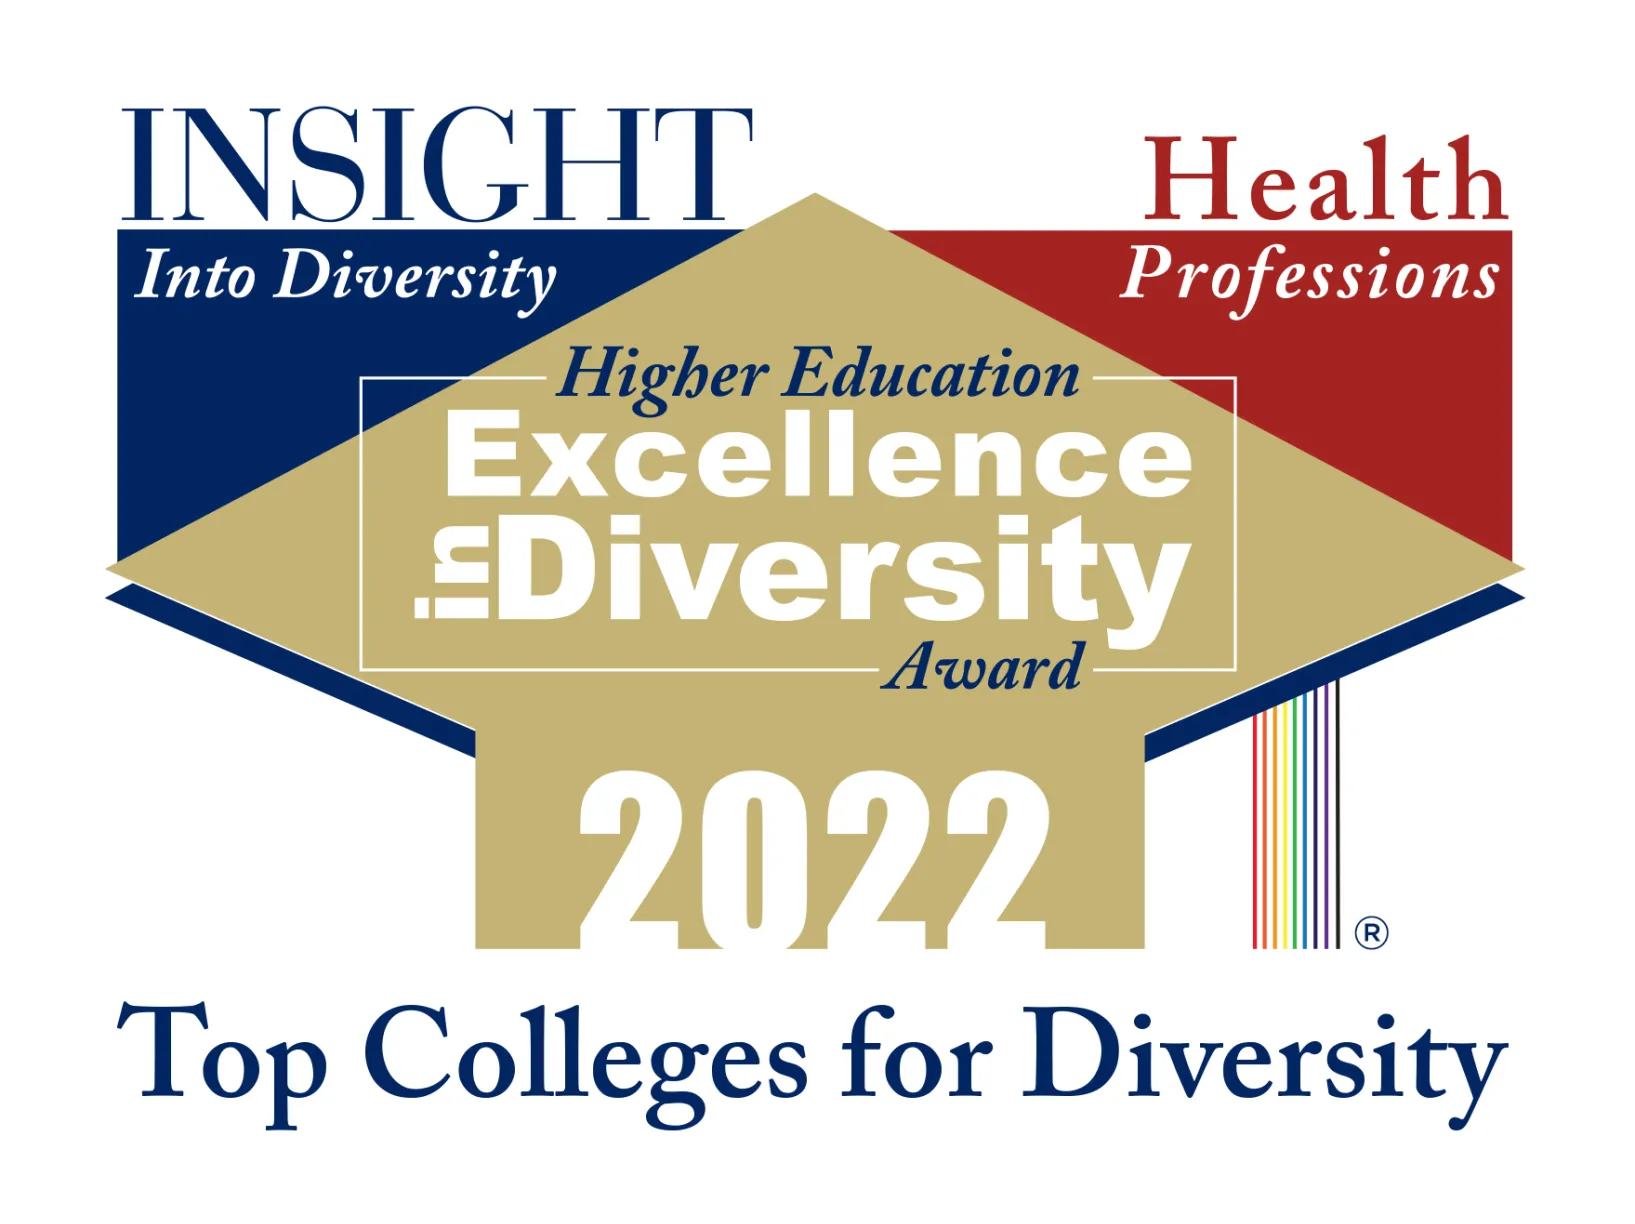 Graphic for the 2022 Higher EducationExcellence in Diversity award